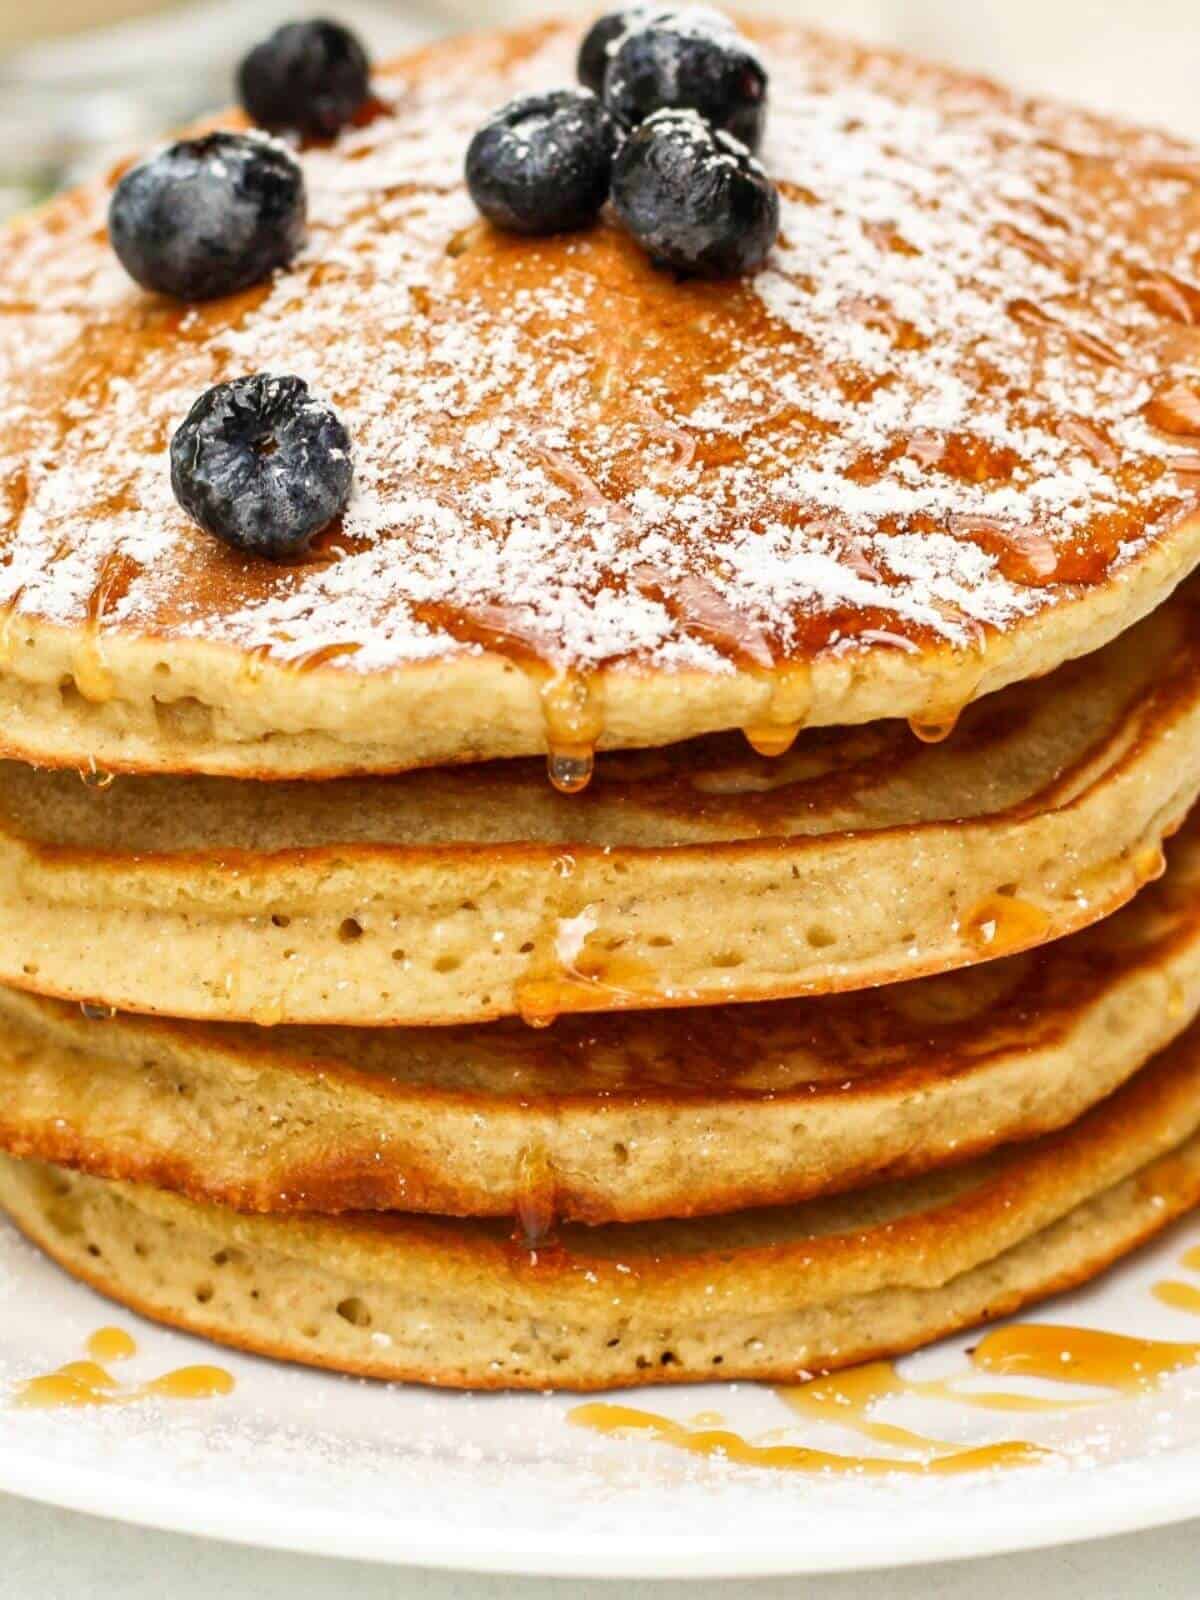 A close up show of a stack of pancakes with some syrup, powdered sugra and blueberies on top.